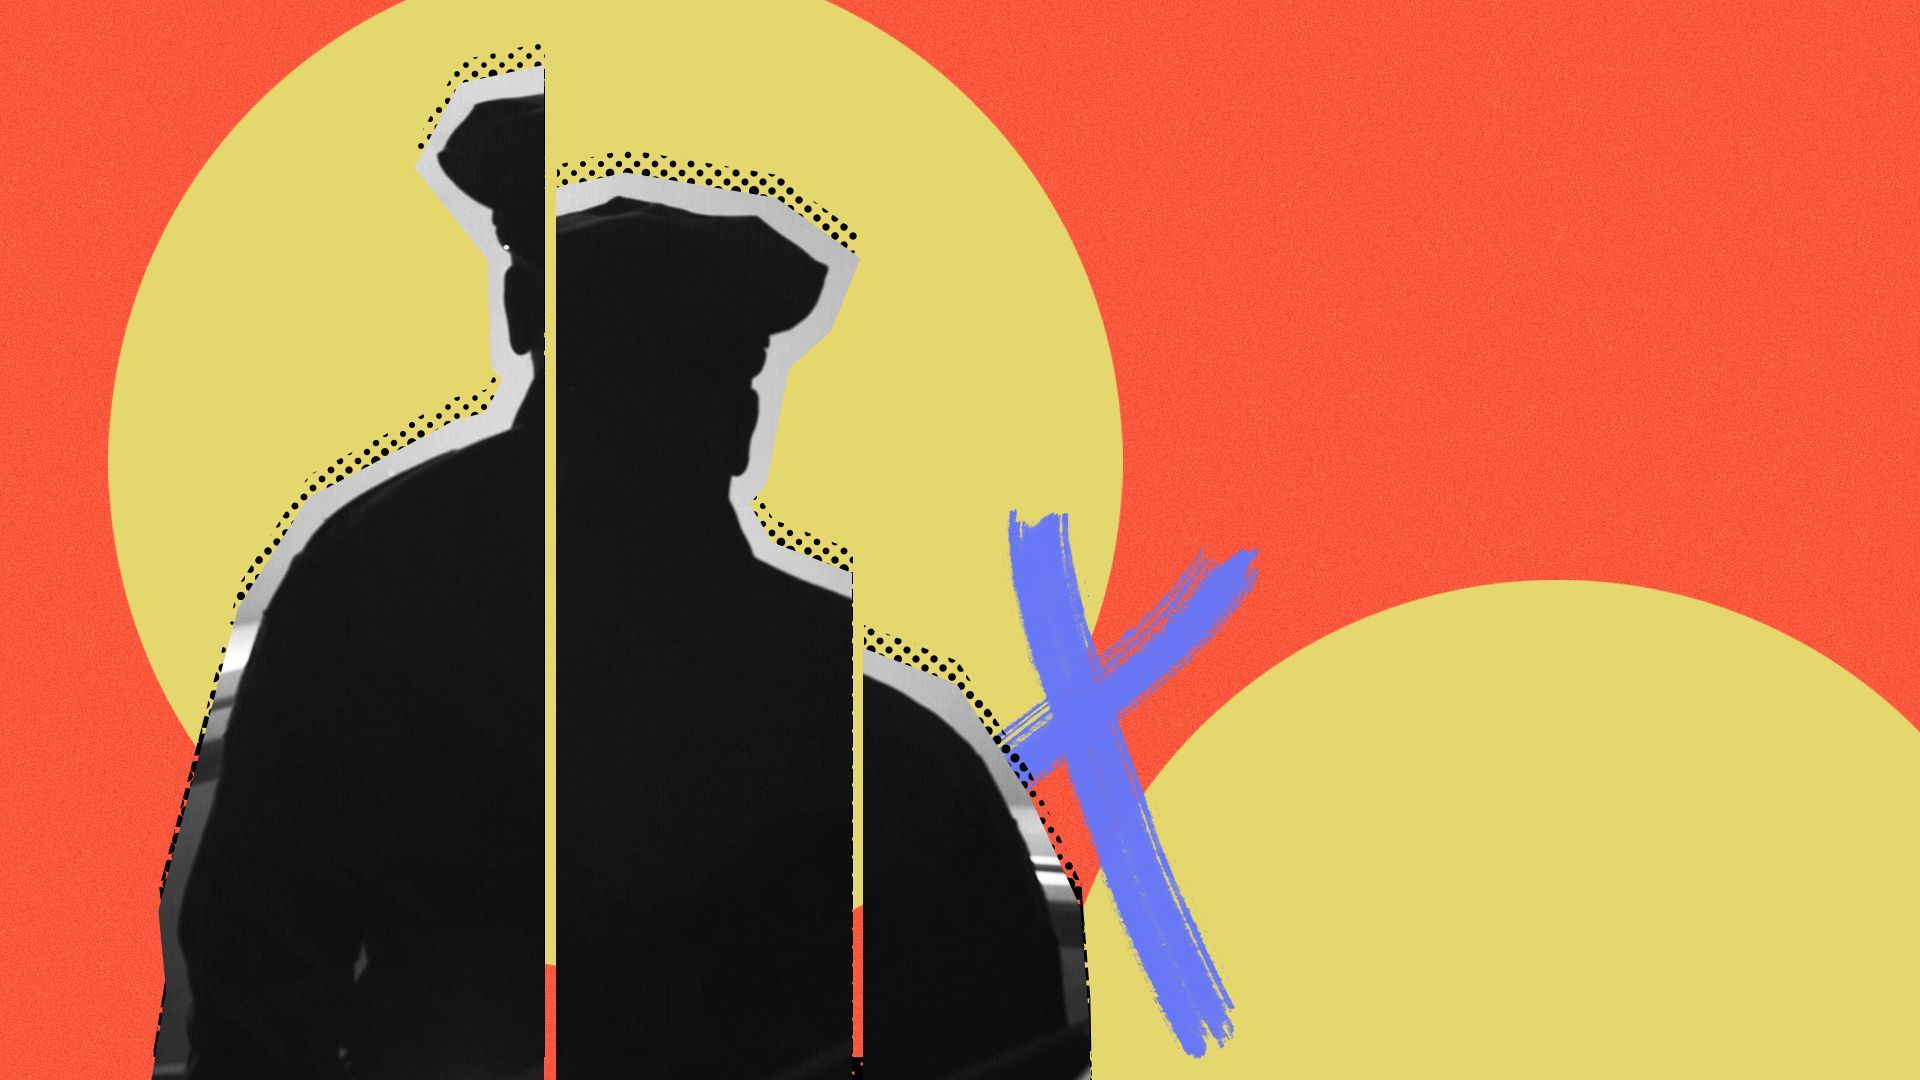 Illustration of a police officer's silhouette cut vertically in thirds and descending in height to mimic a downward trending bar chart